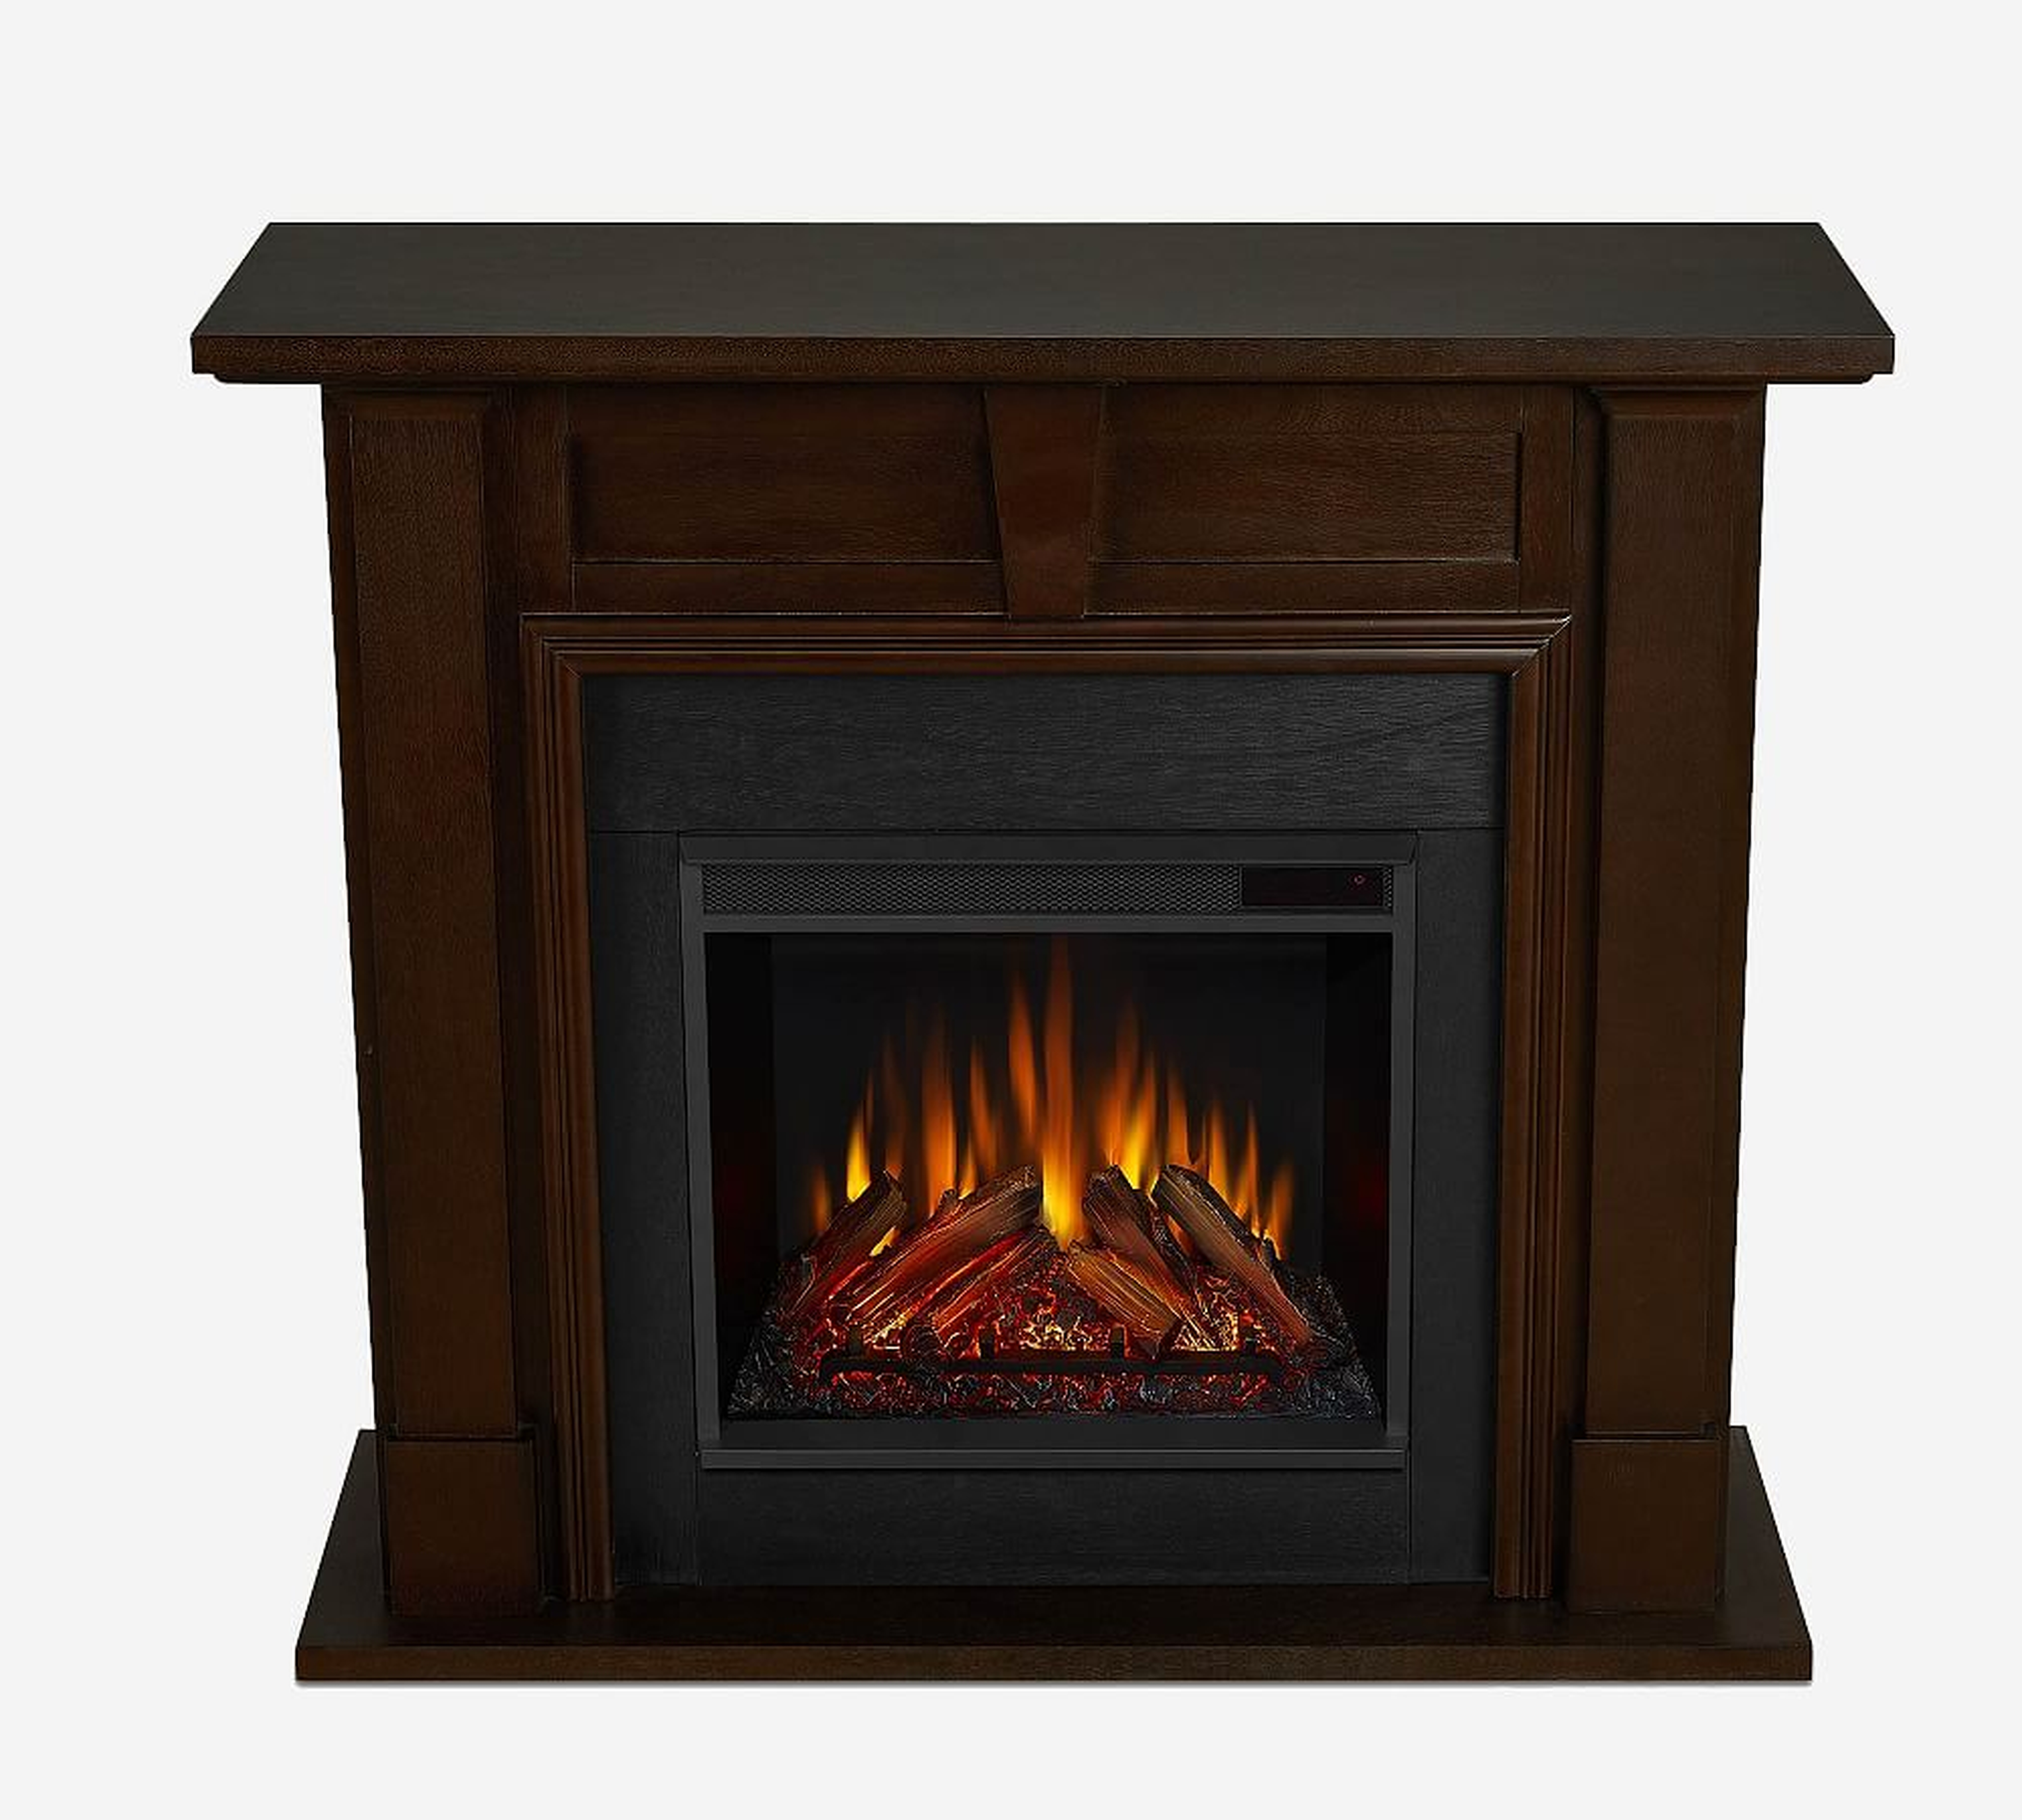 Real Flame 50" Granby Electric Fireplace, Dark Walnut - Pottery Barn